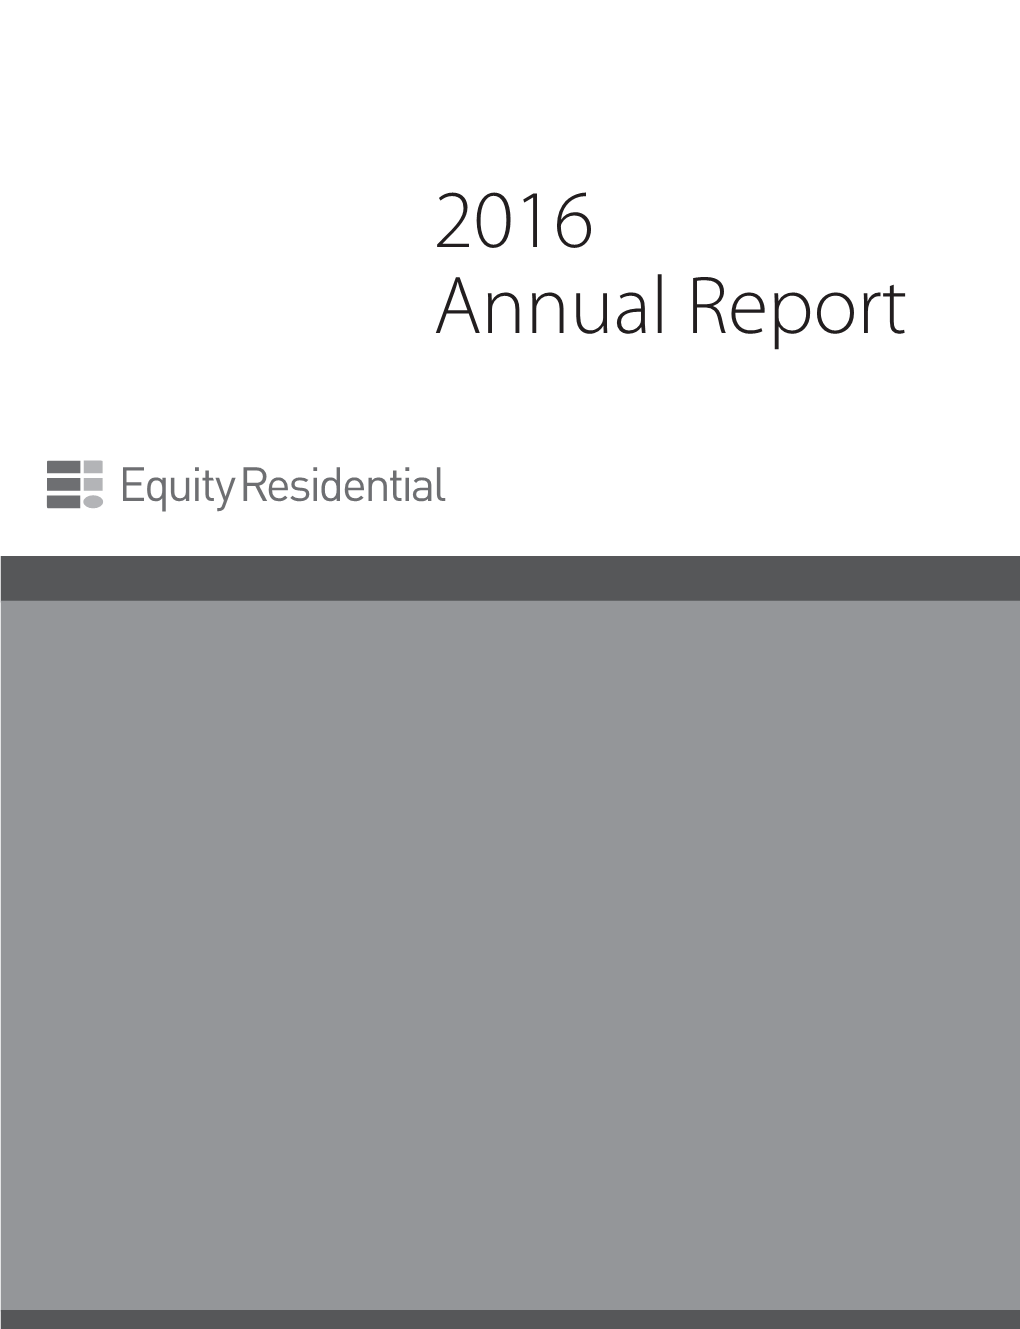 Equity Residential 2016 Annual Report